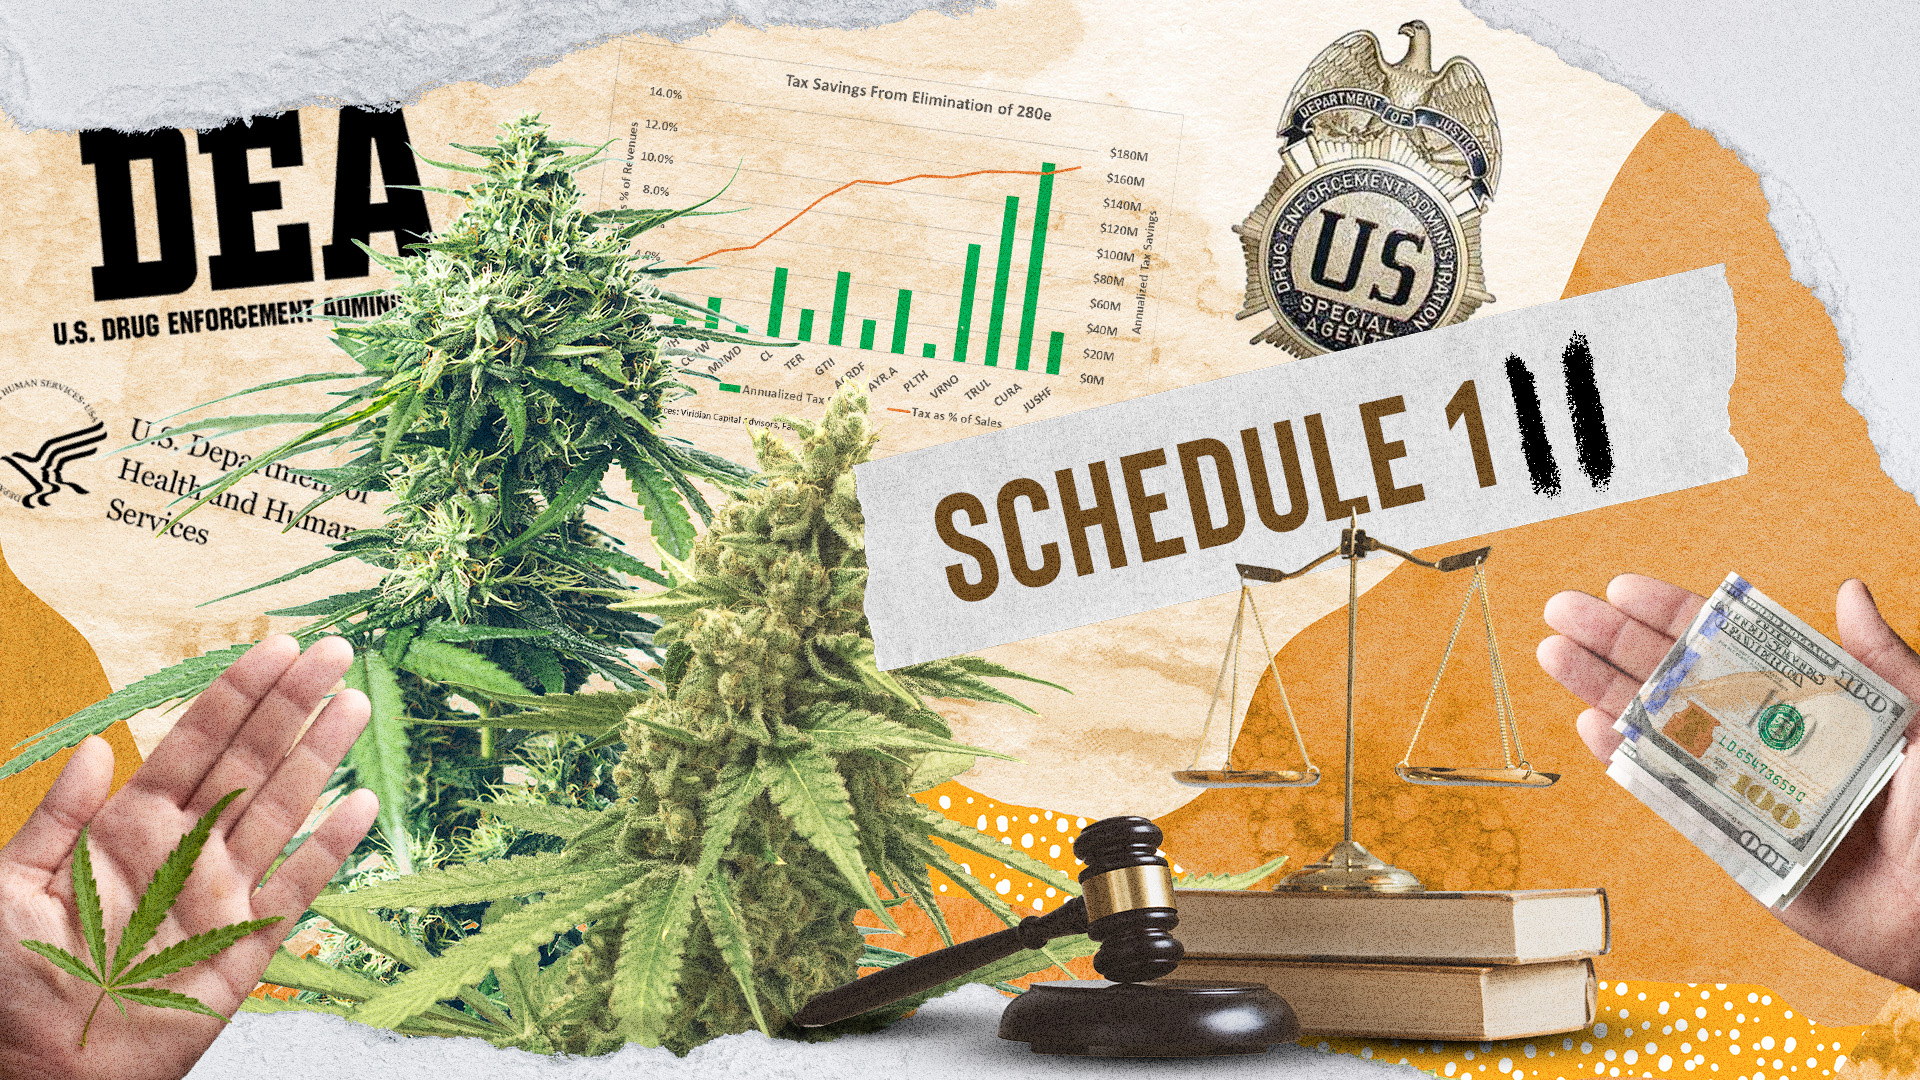 HSS Releases Full Recommendation Report for Rescheduling Cannabis: What Will This Mean for Med & Rec Markets?